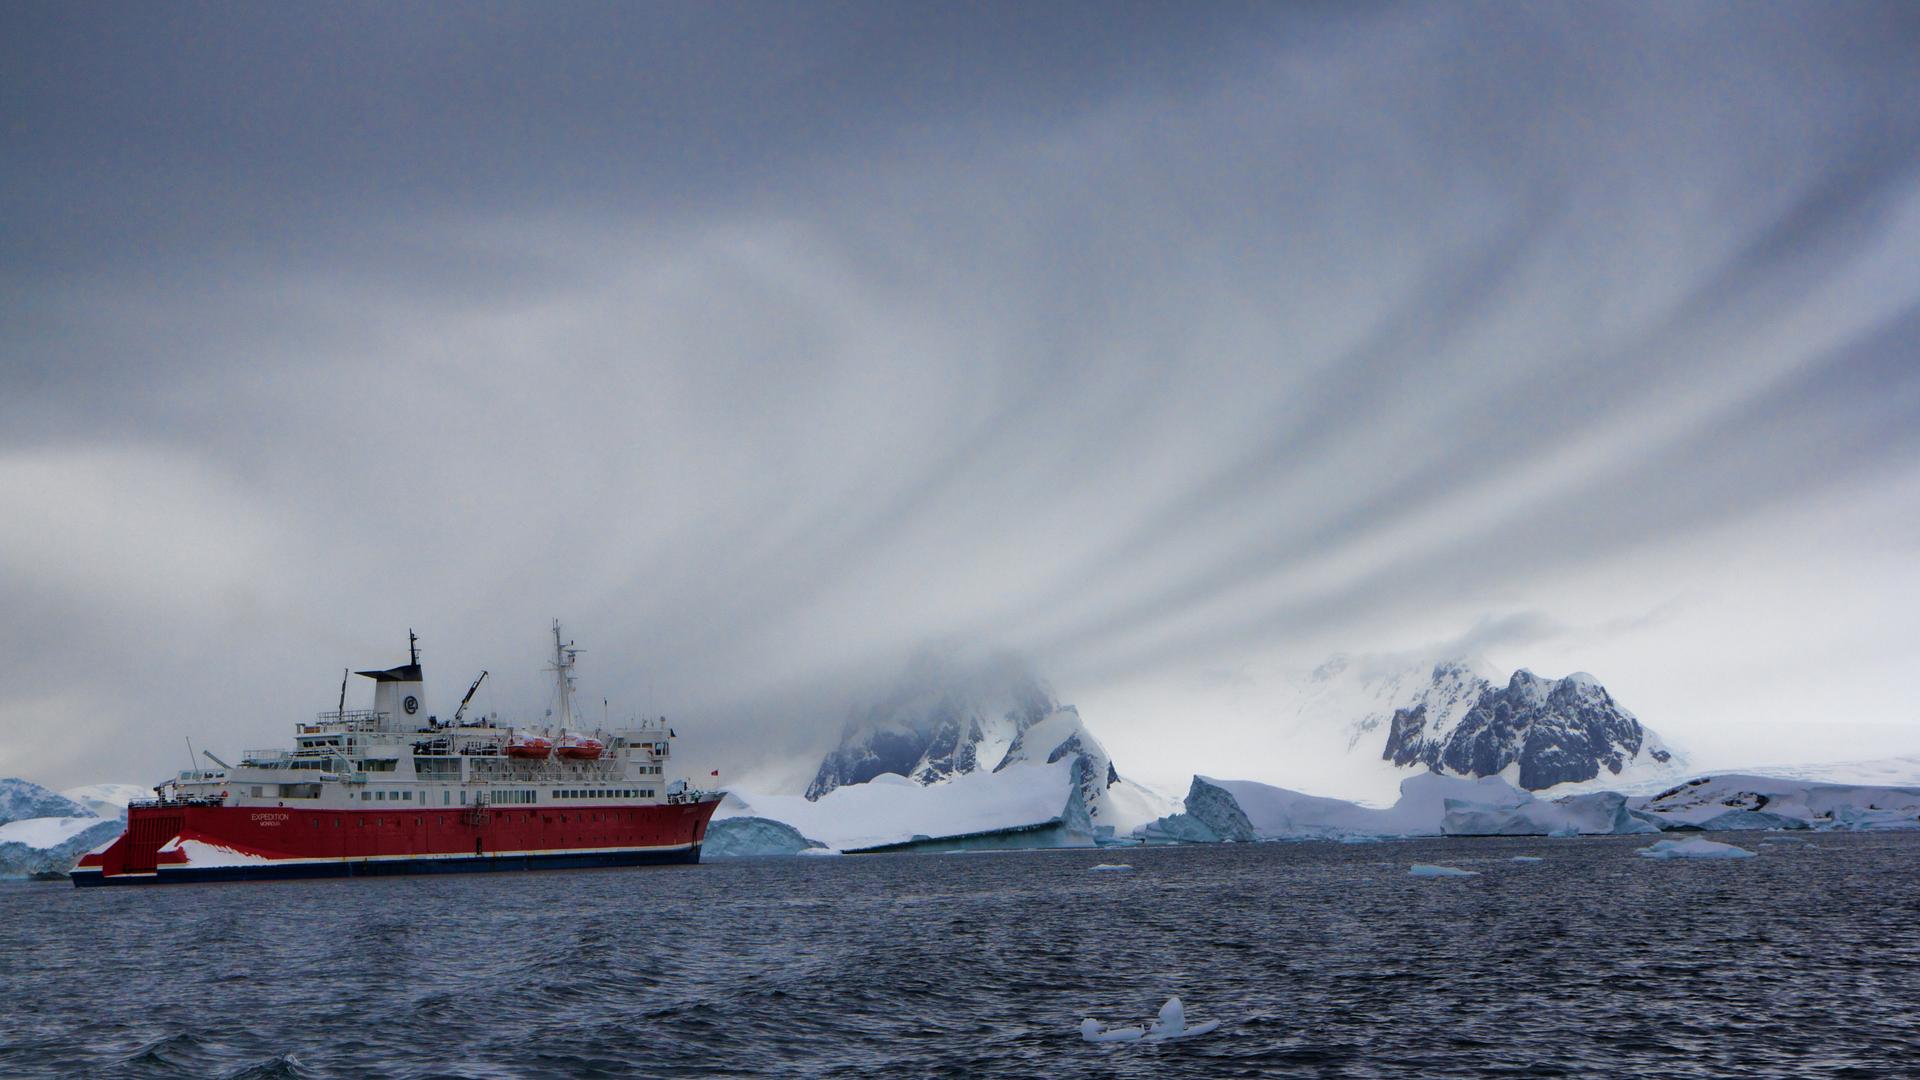 A ship carrying tourists plies the waters off Antarctica.